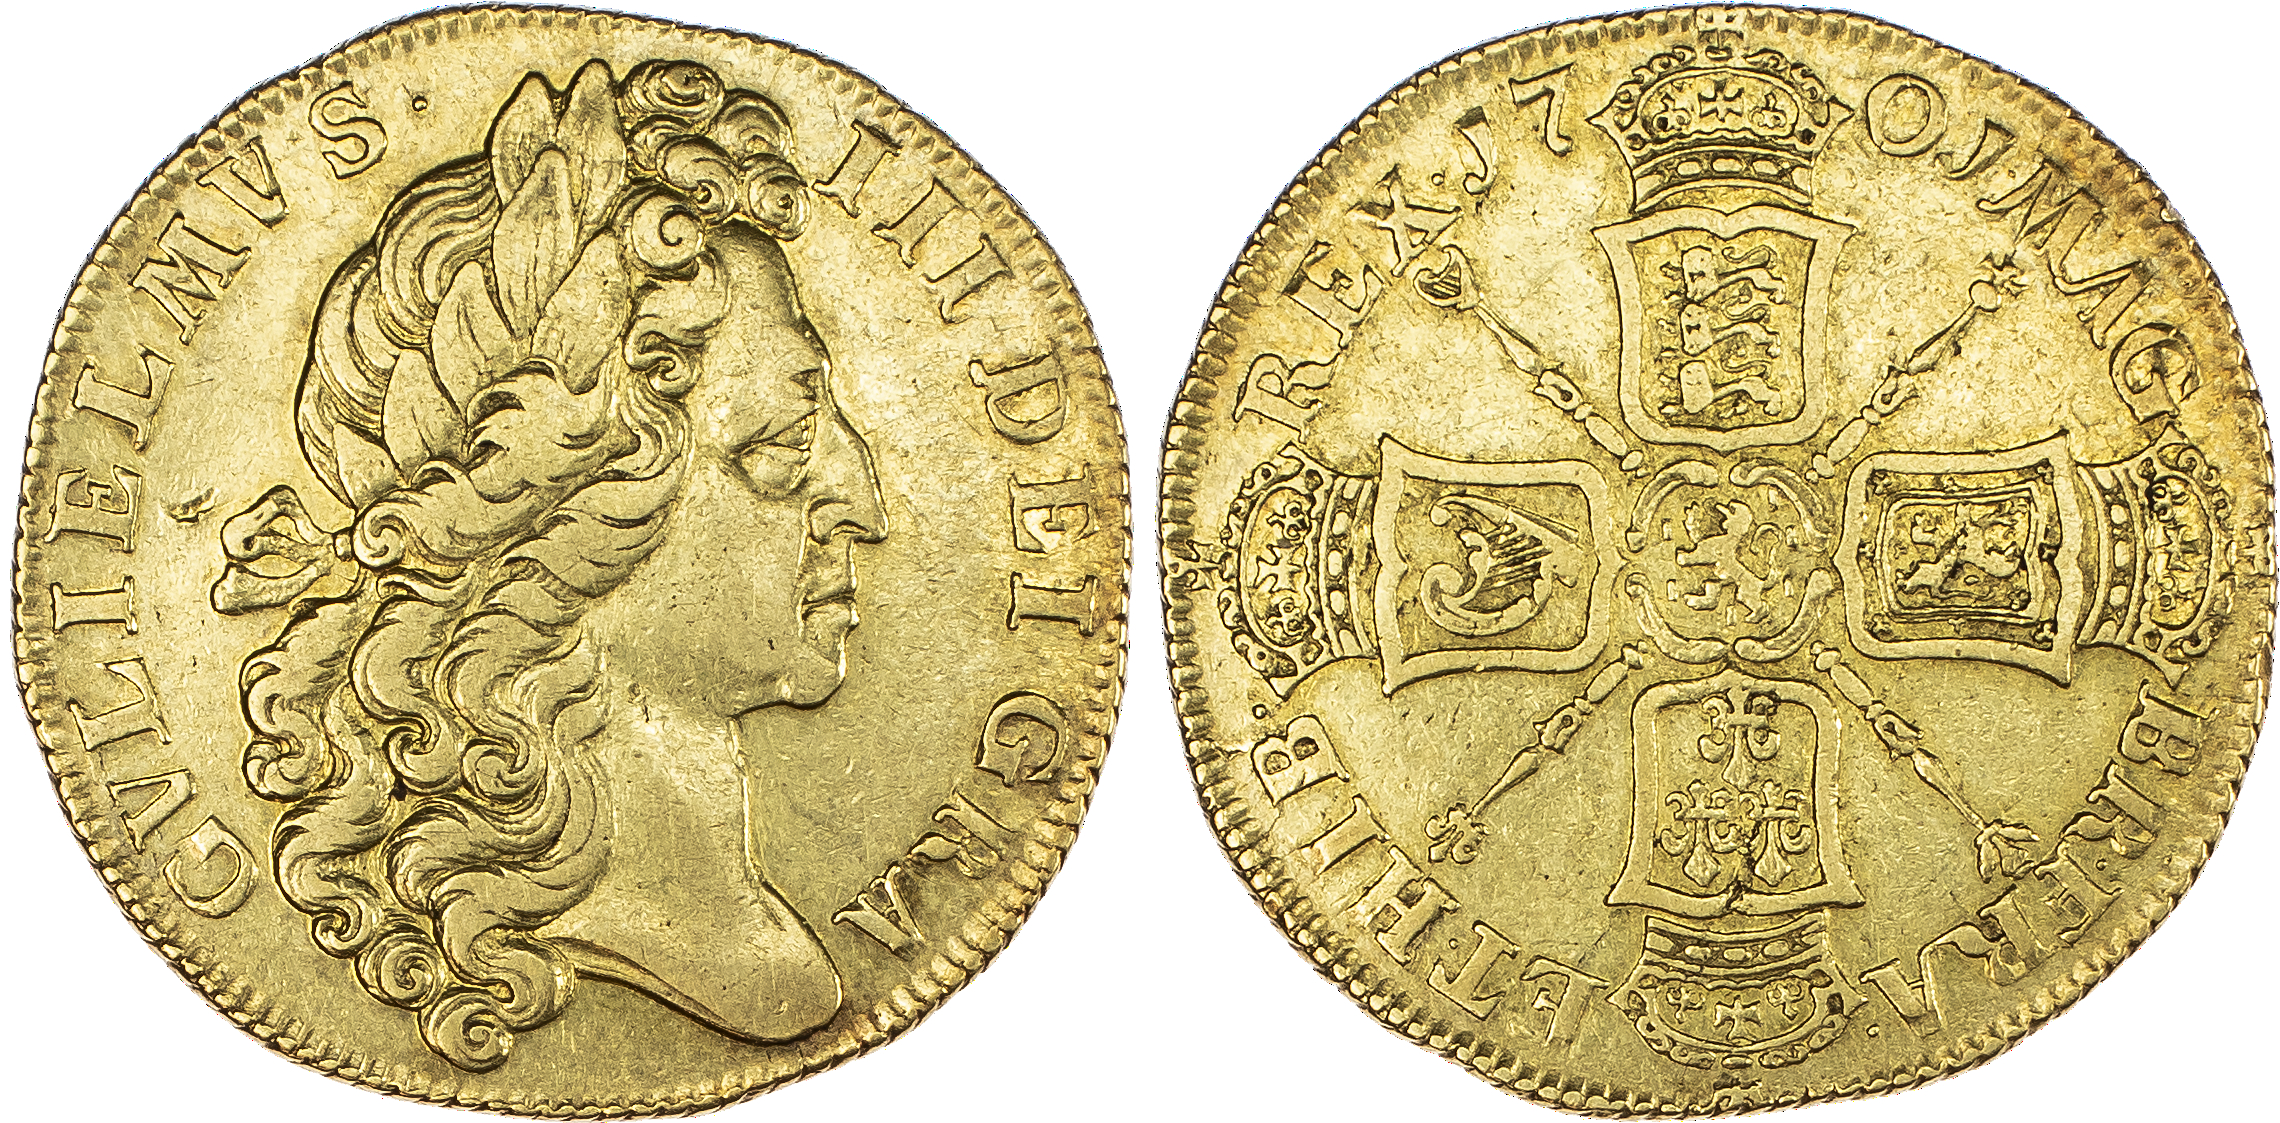 William III (1694-1702), Two-Guineas, 1701, "Fine Work" issue